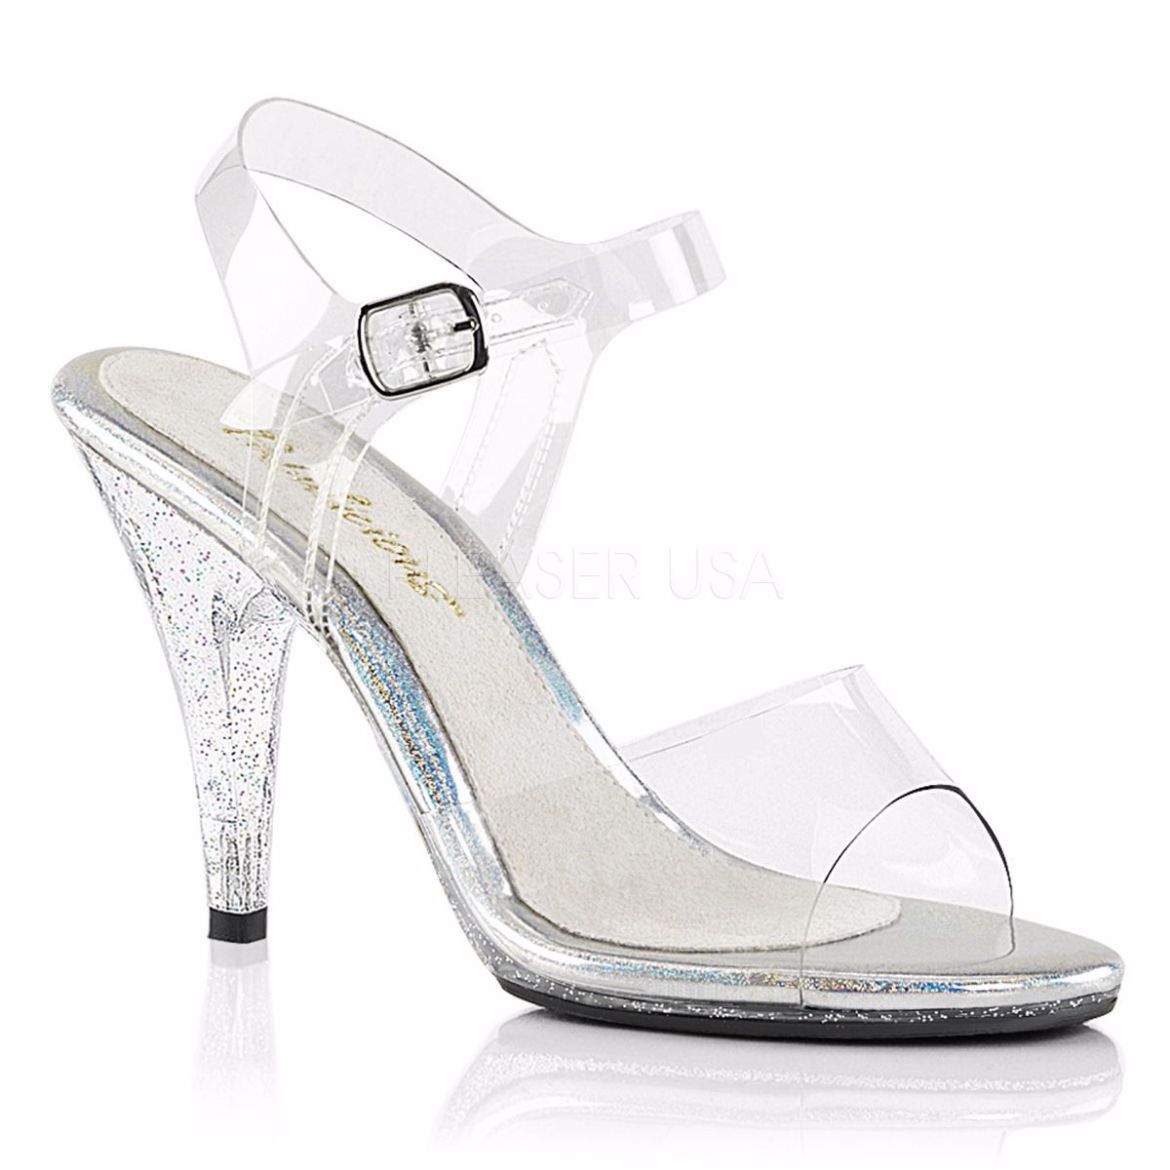 Product image of Fabulicious Caress-408Mg Clear/Clear, 4 inch (10.2 cm) Heel, 1/8 inch (0.3 cm) Platform Sandal Shoes